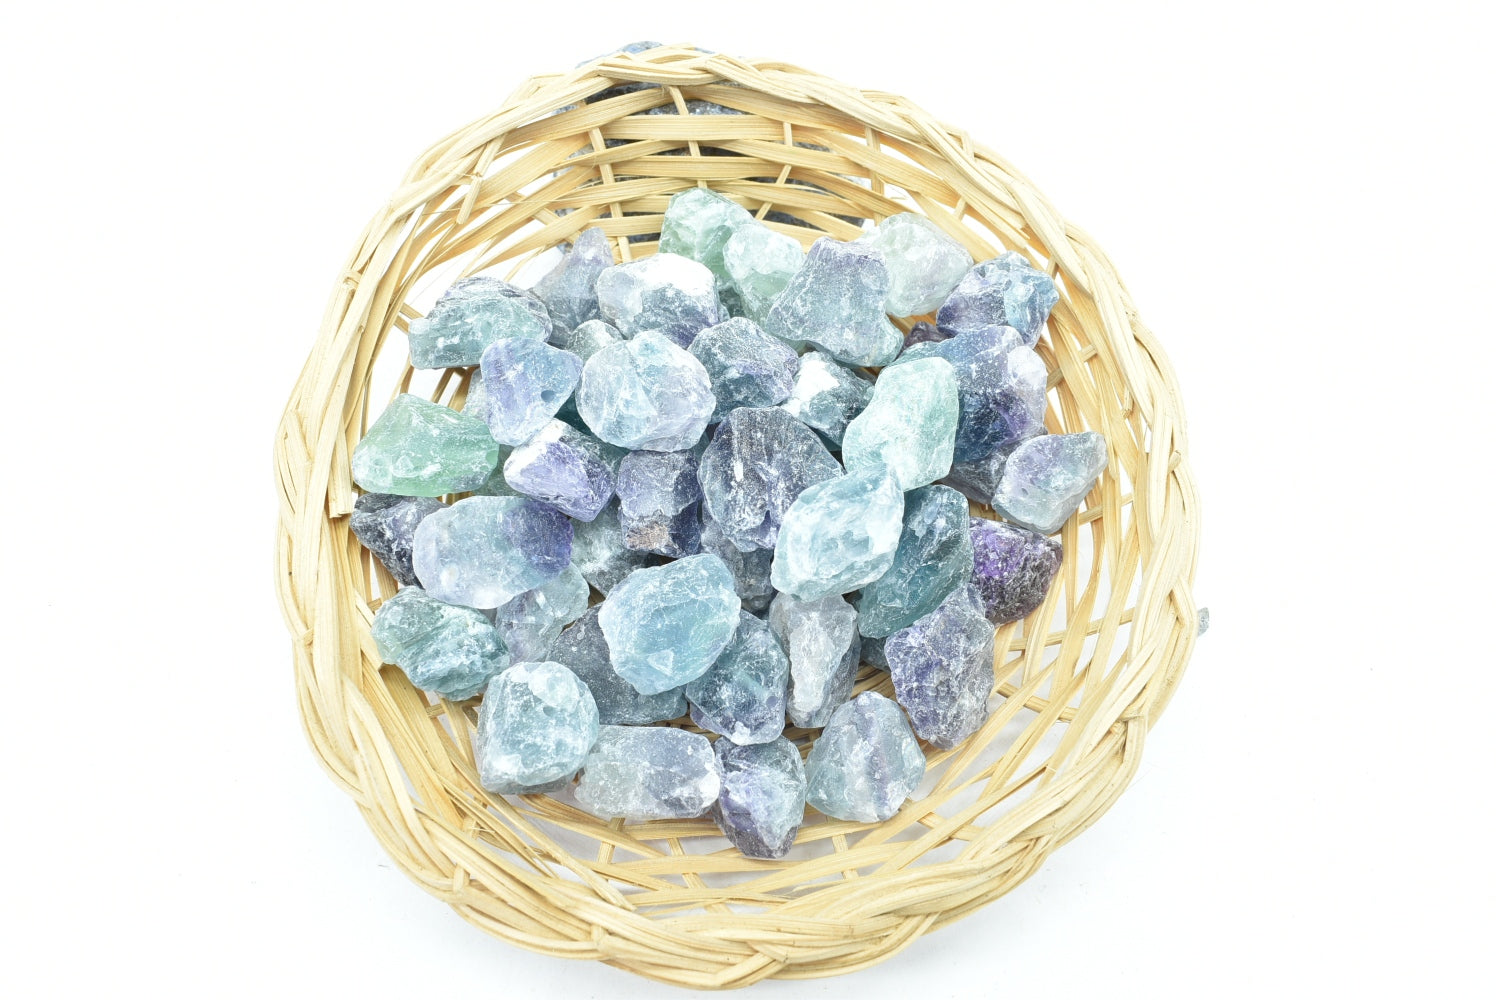 Raw Fluorite Stone 15-22 mm Perforated - 1 Piece